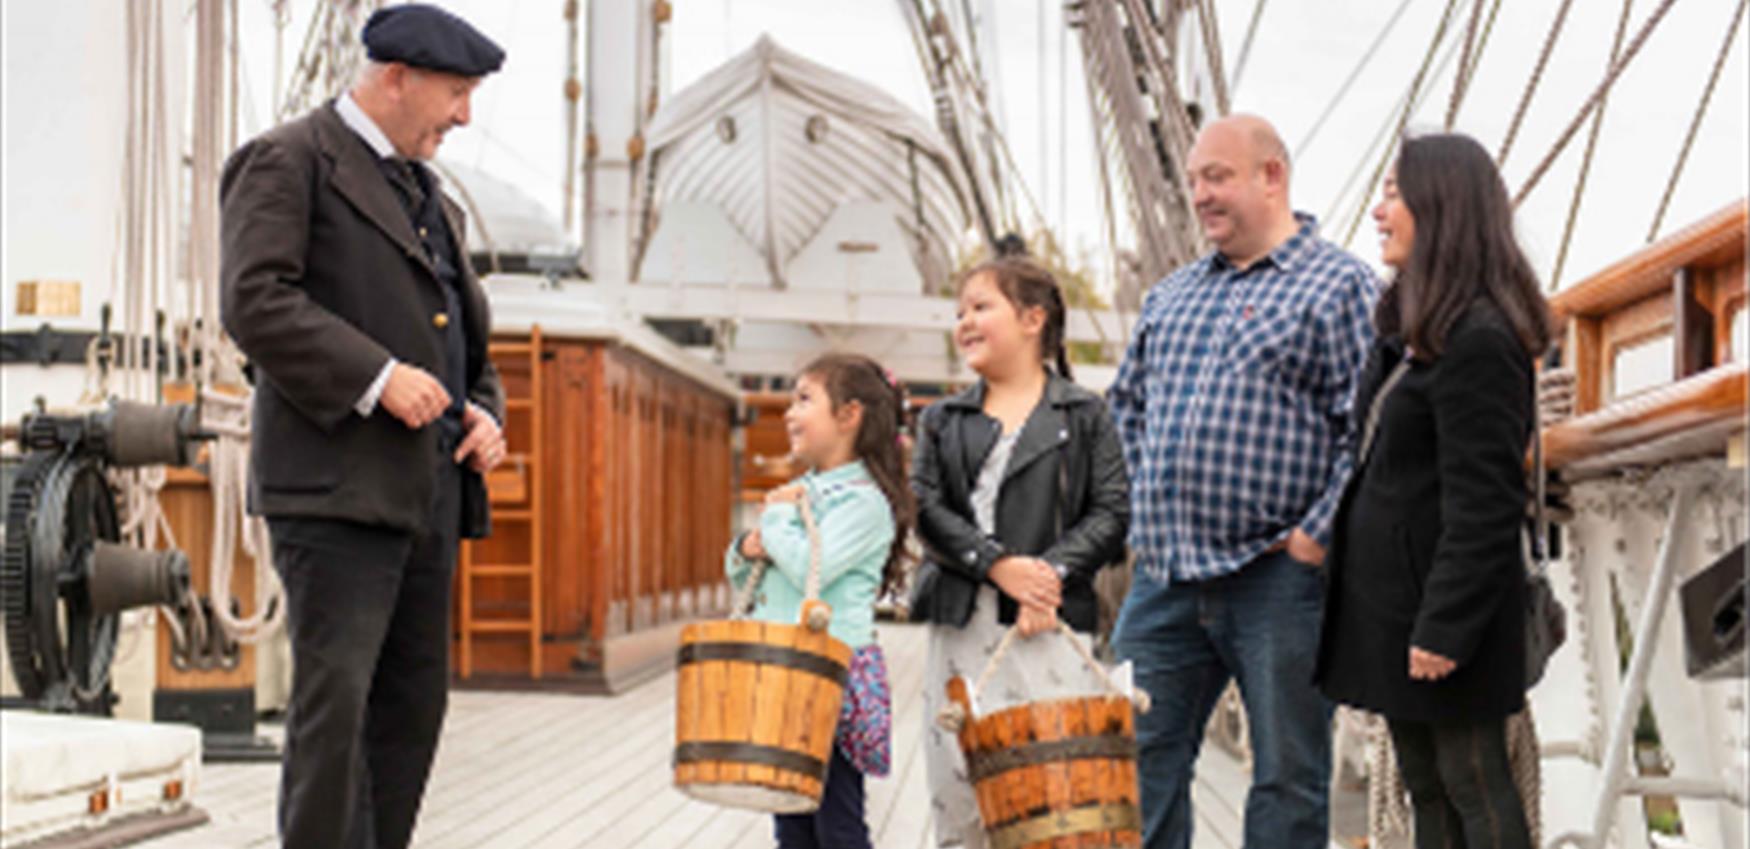 A family speak to the captain of the Cutty Sark in Greenwich.